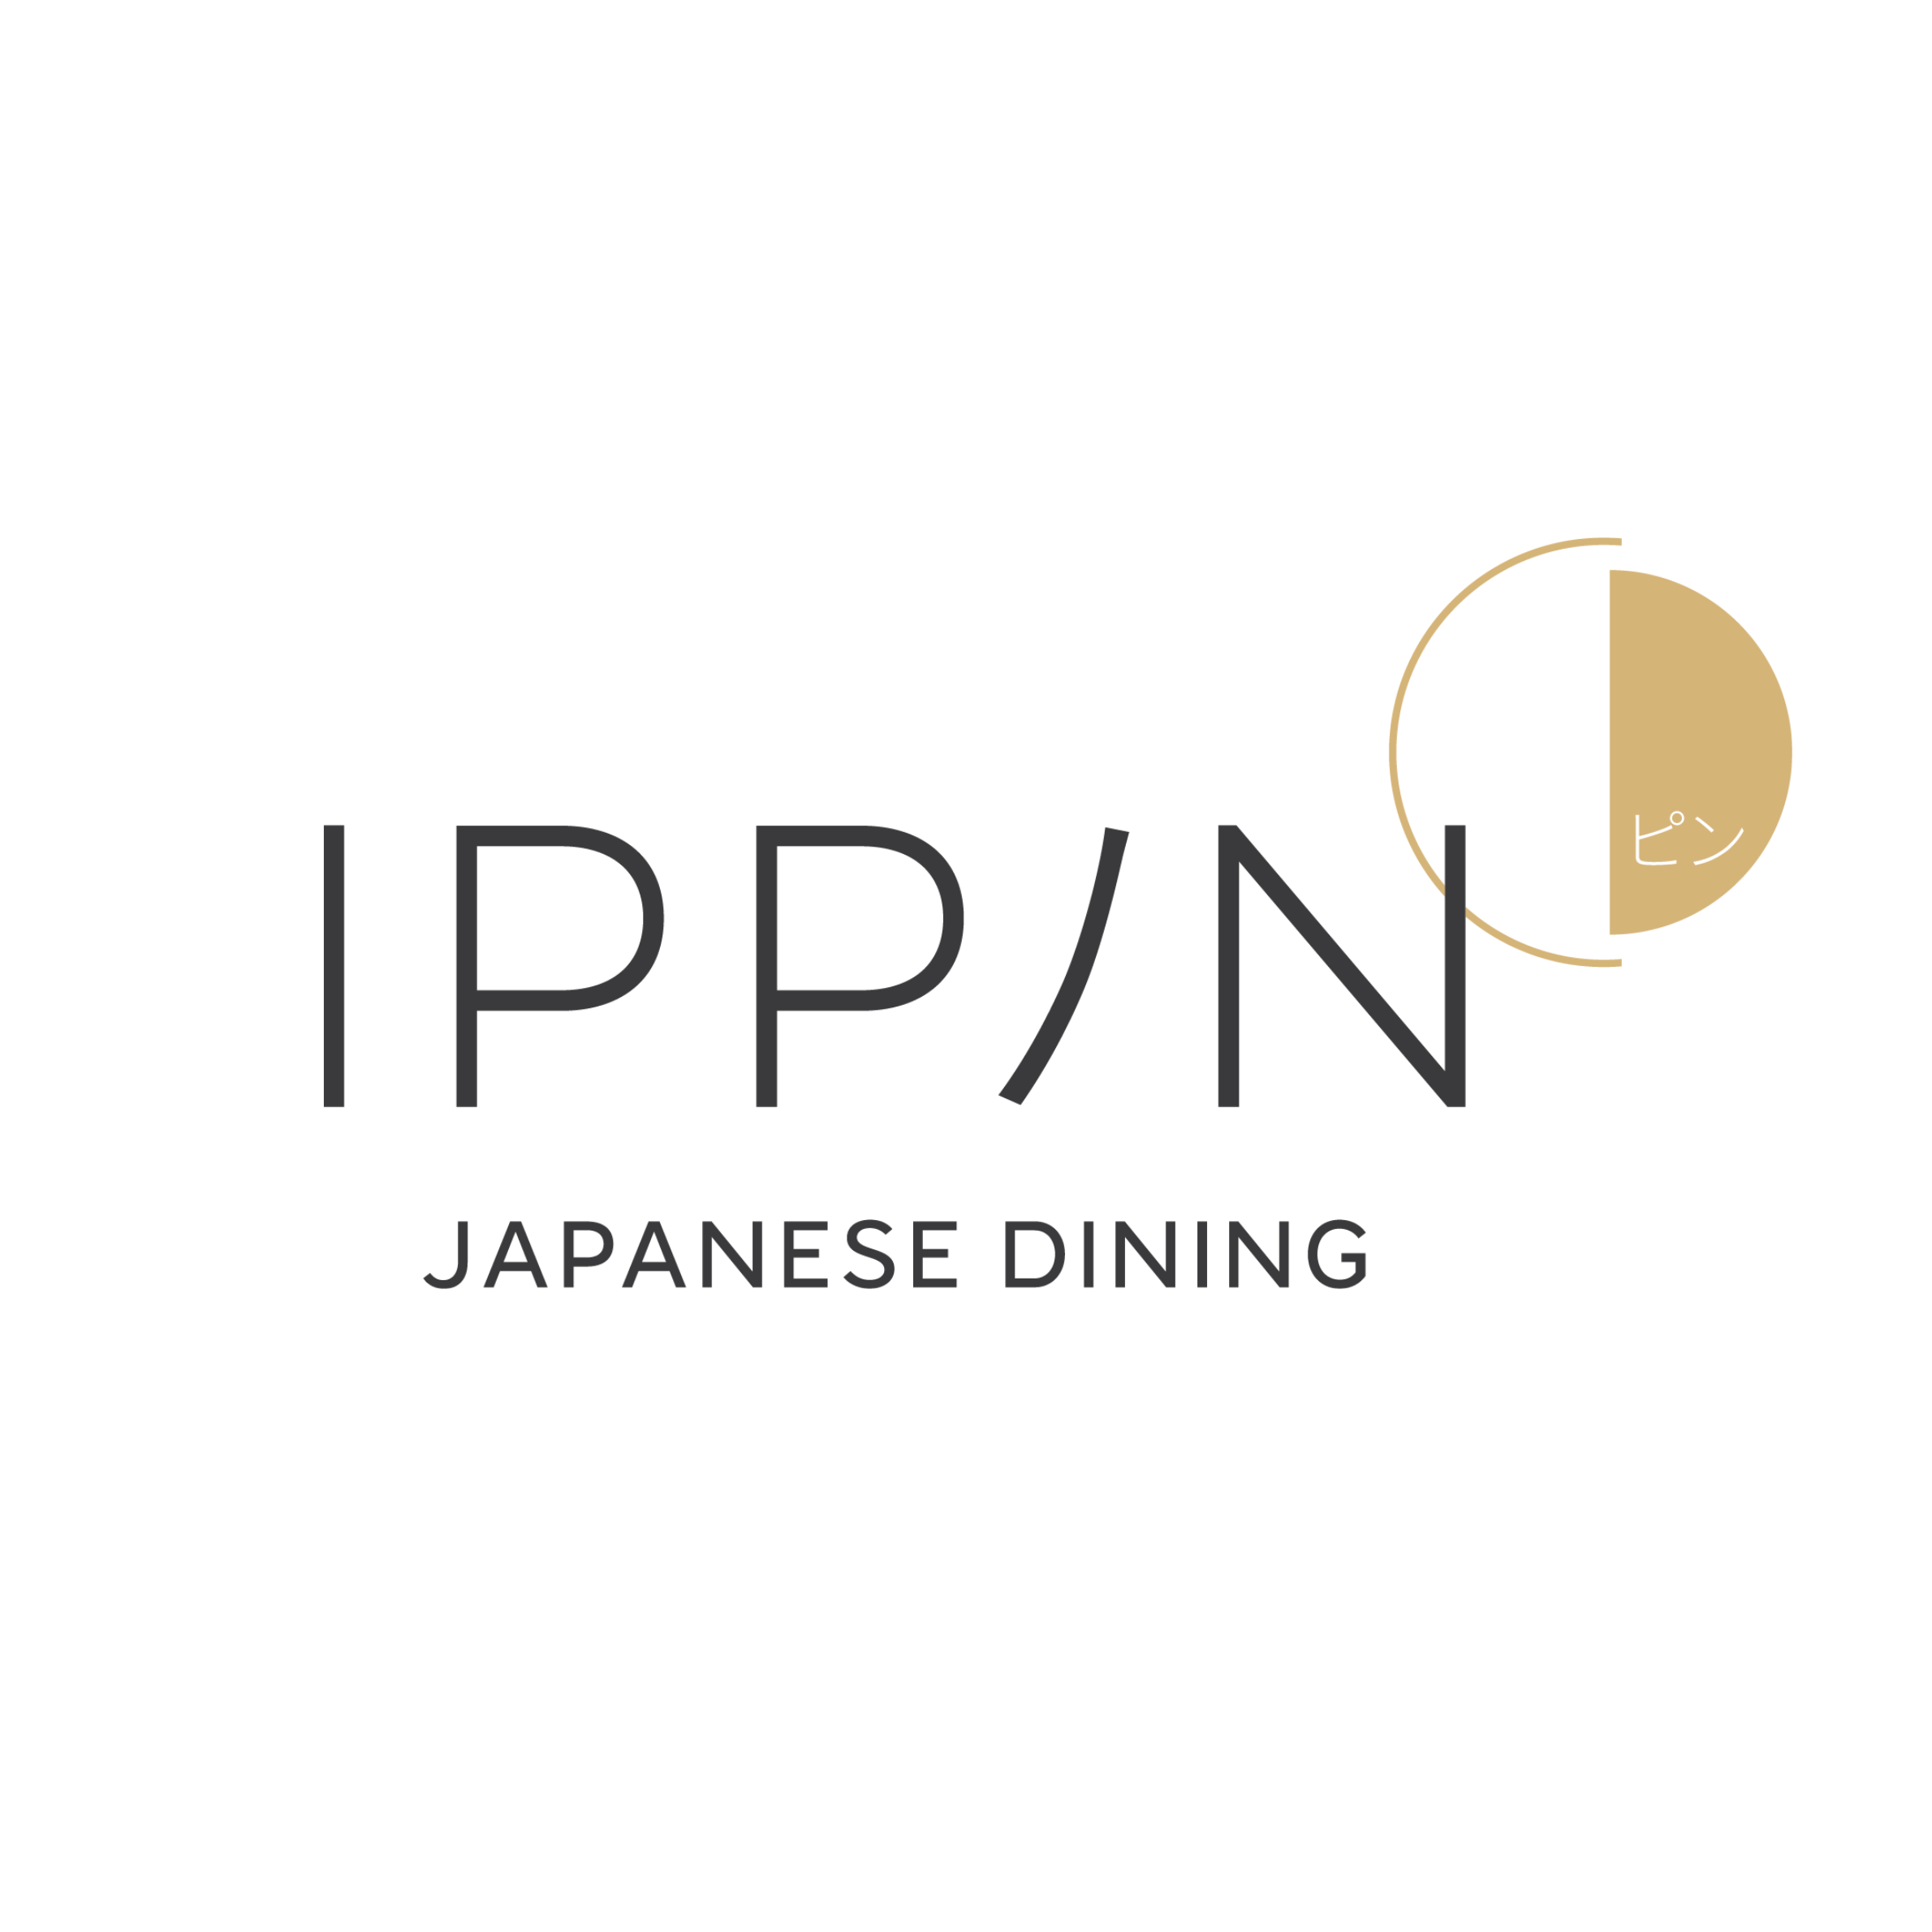 IPPIN Japanese Dining